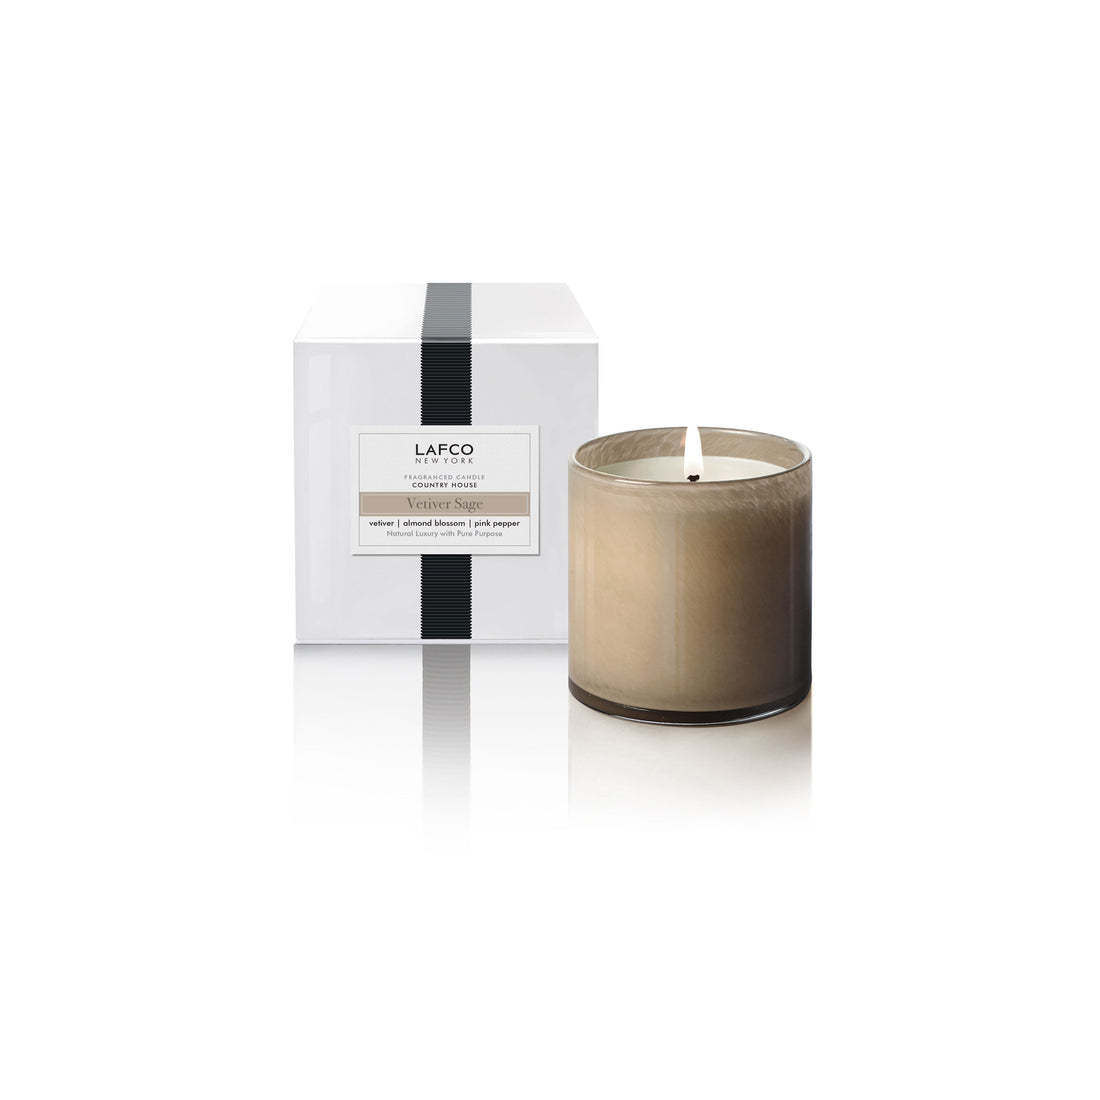 Vetiver Sage - LAFCO Candle